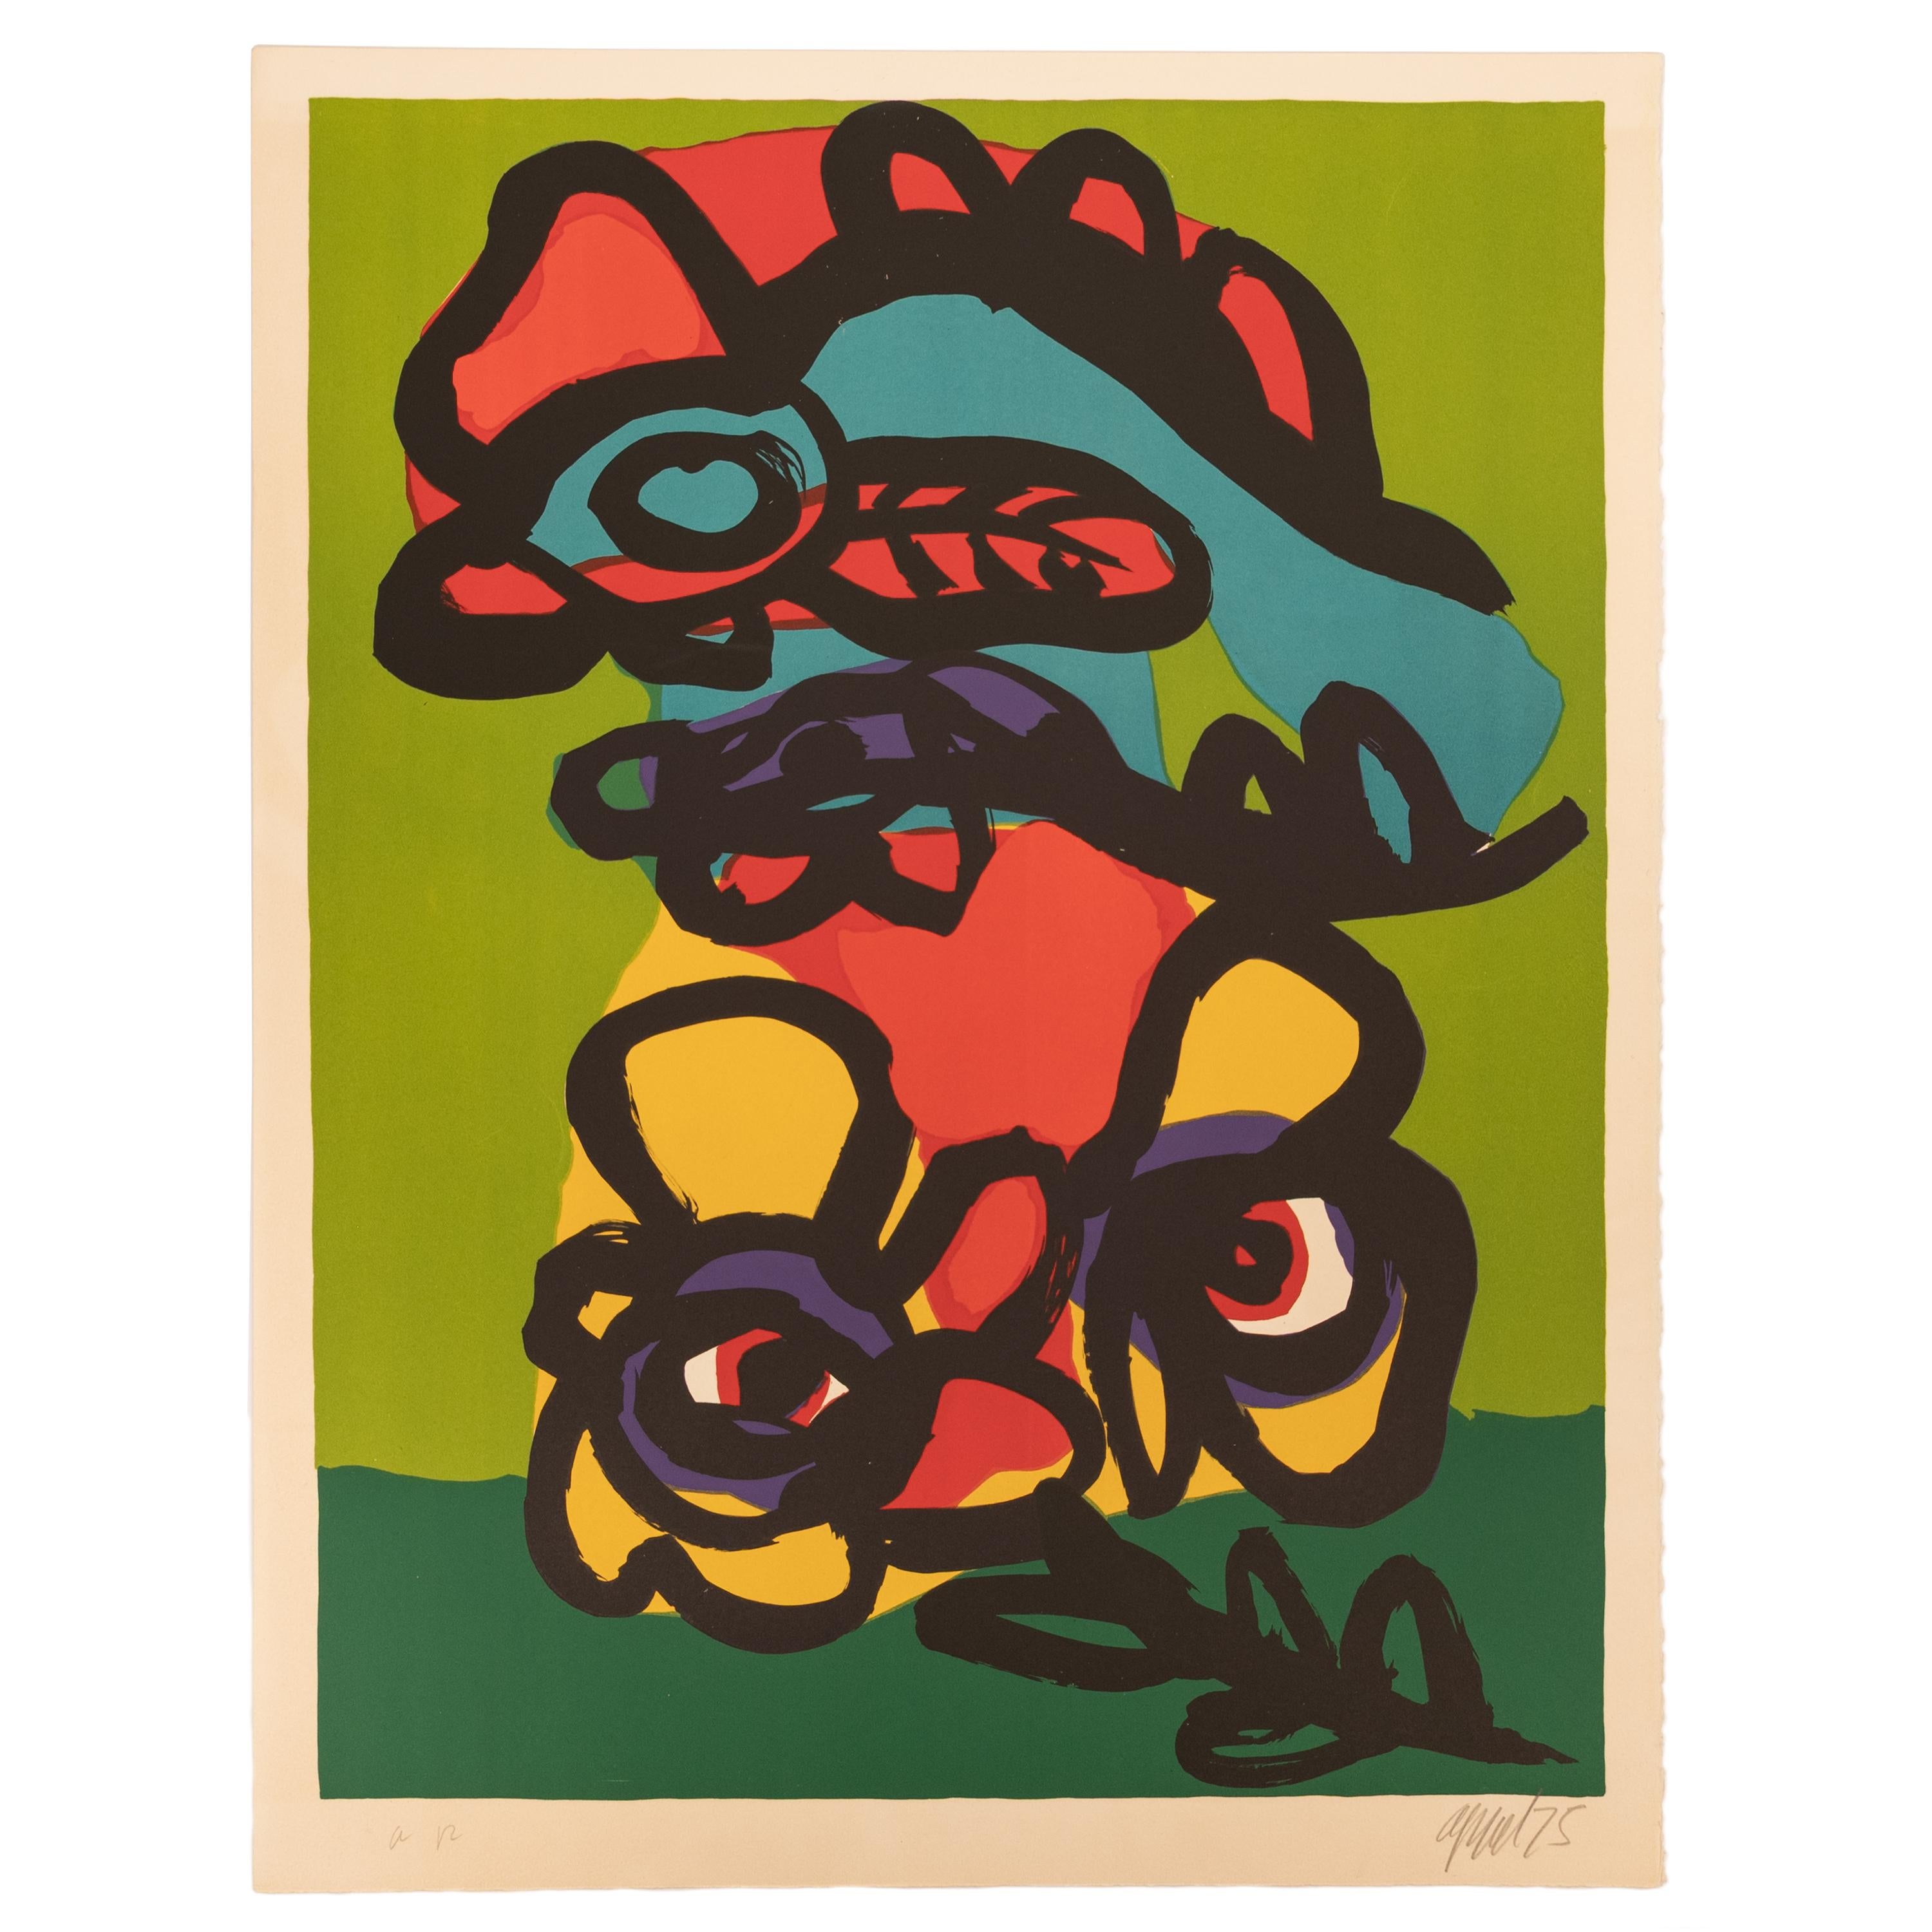 Karel Appel (1921-2006)
Hommage a Fernand Mourlot. by Karel Appel
This colorful abstract lithograph was printed in 1975 at the Atelier Mourlot in Paris and is an Artist's proof from an edition of 125. Condition is excellent, we at Bloomsbury Fine